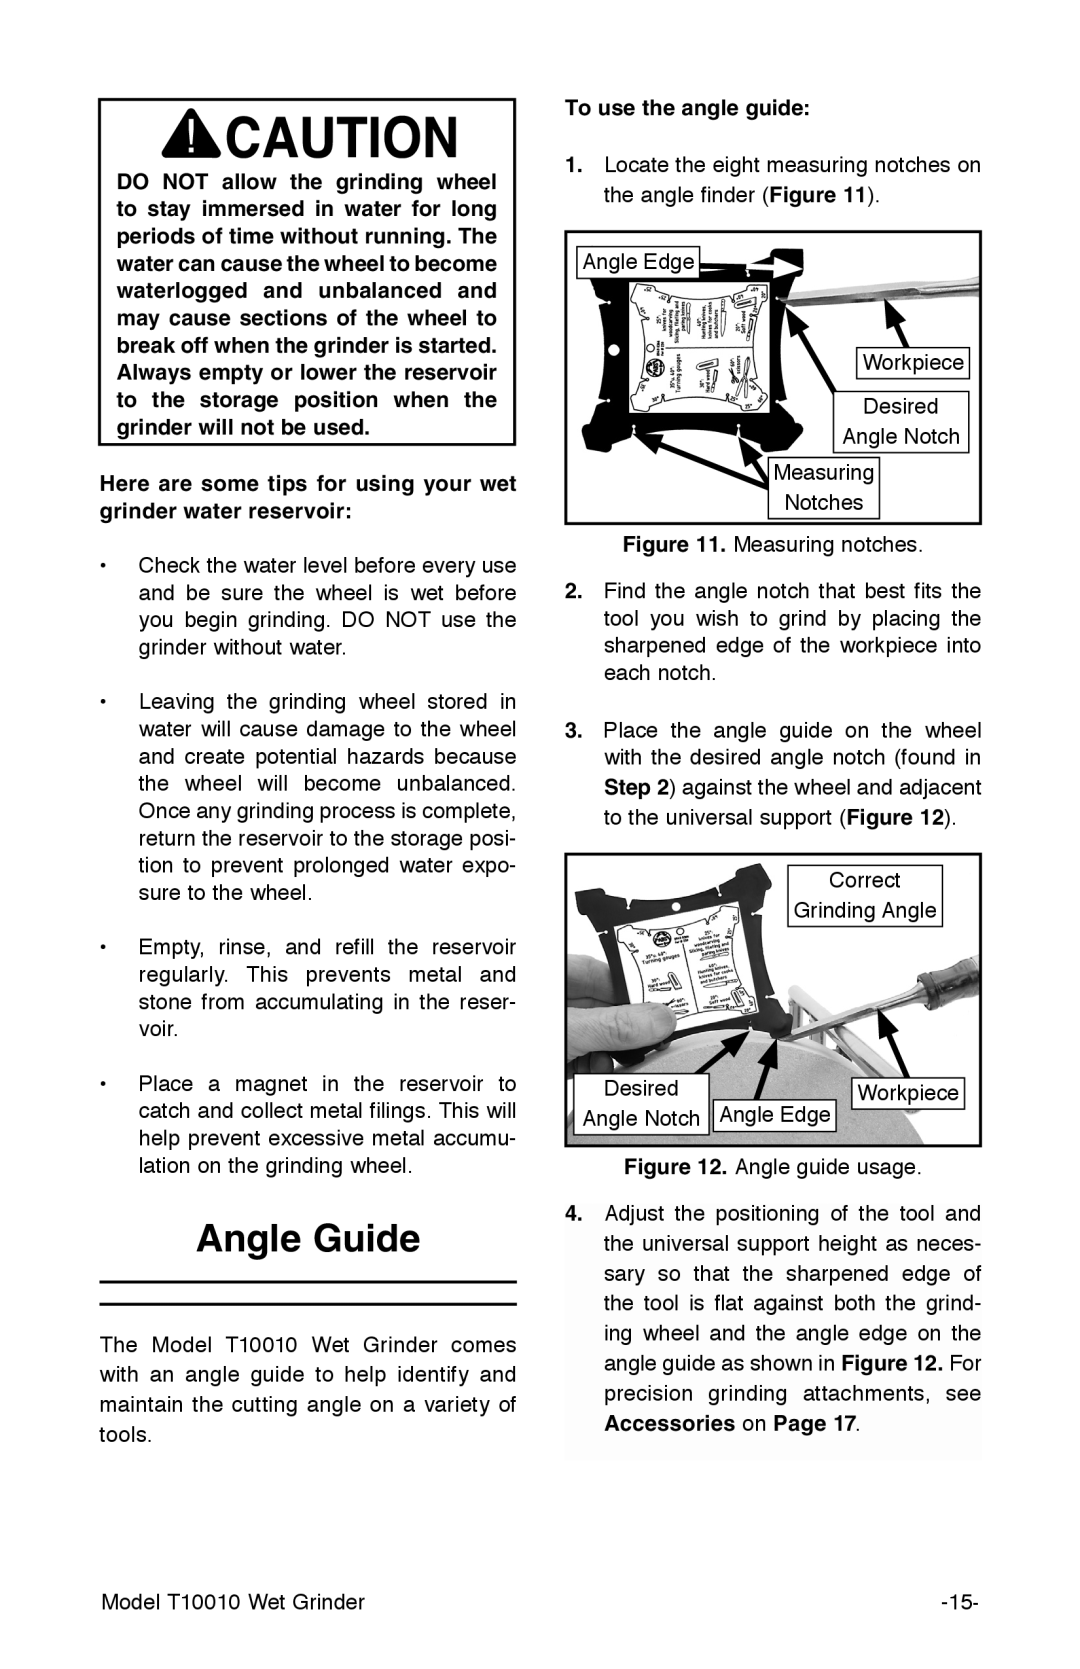 Grizzly T10010 manual Angle Guide, Here are some tips for using your wet grinder water reservoir, To use the angle guide 